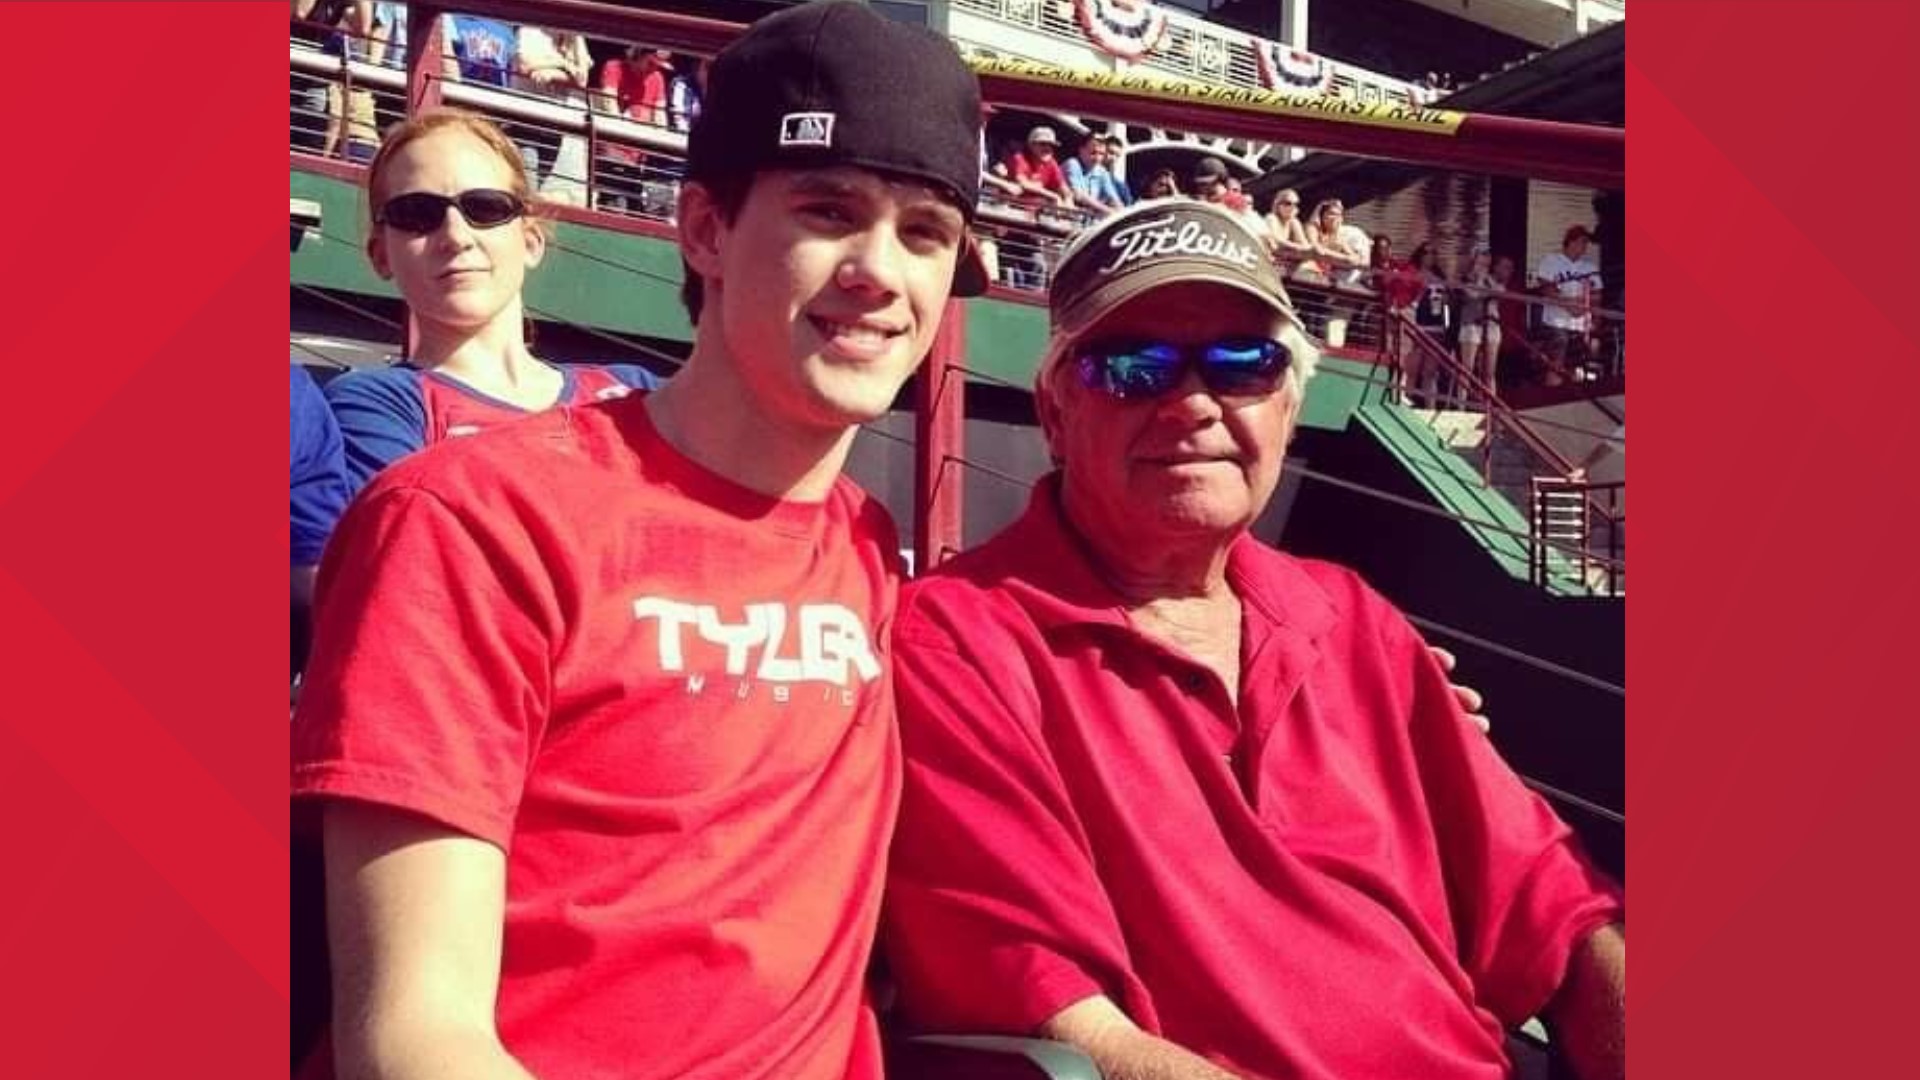 After a lifetime of father-son bonding over Texas Rangers baseball games, it came to their final first pitch together.